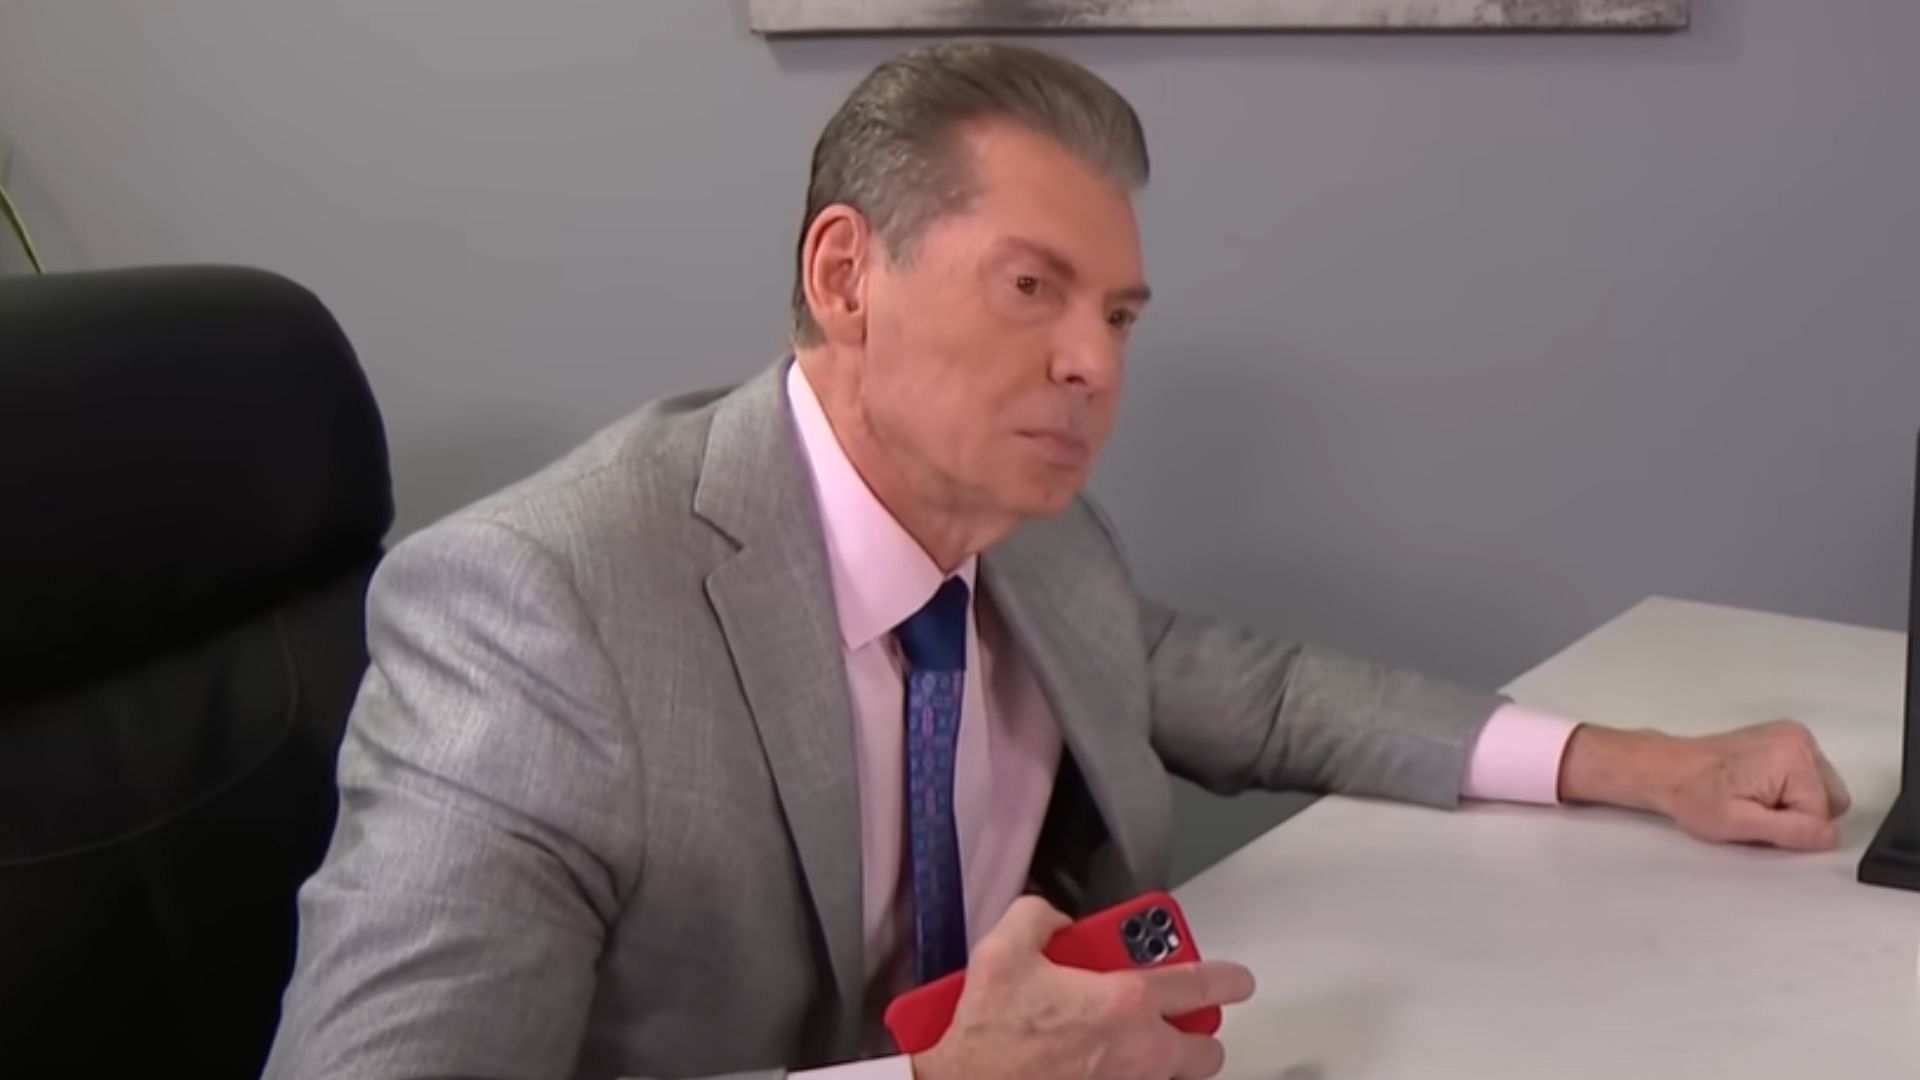 Vince McMahon is WWE